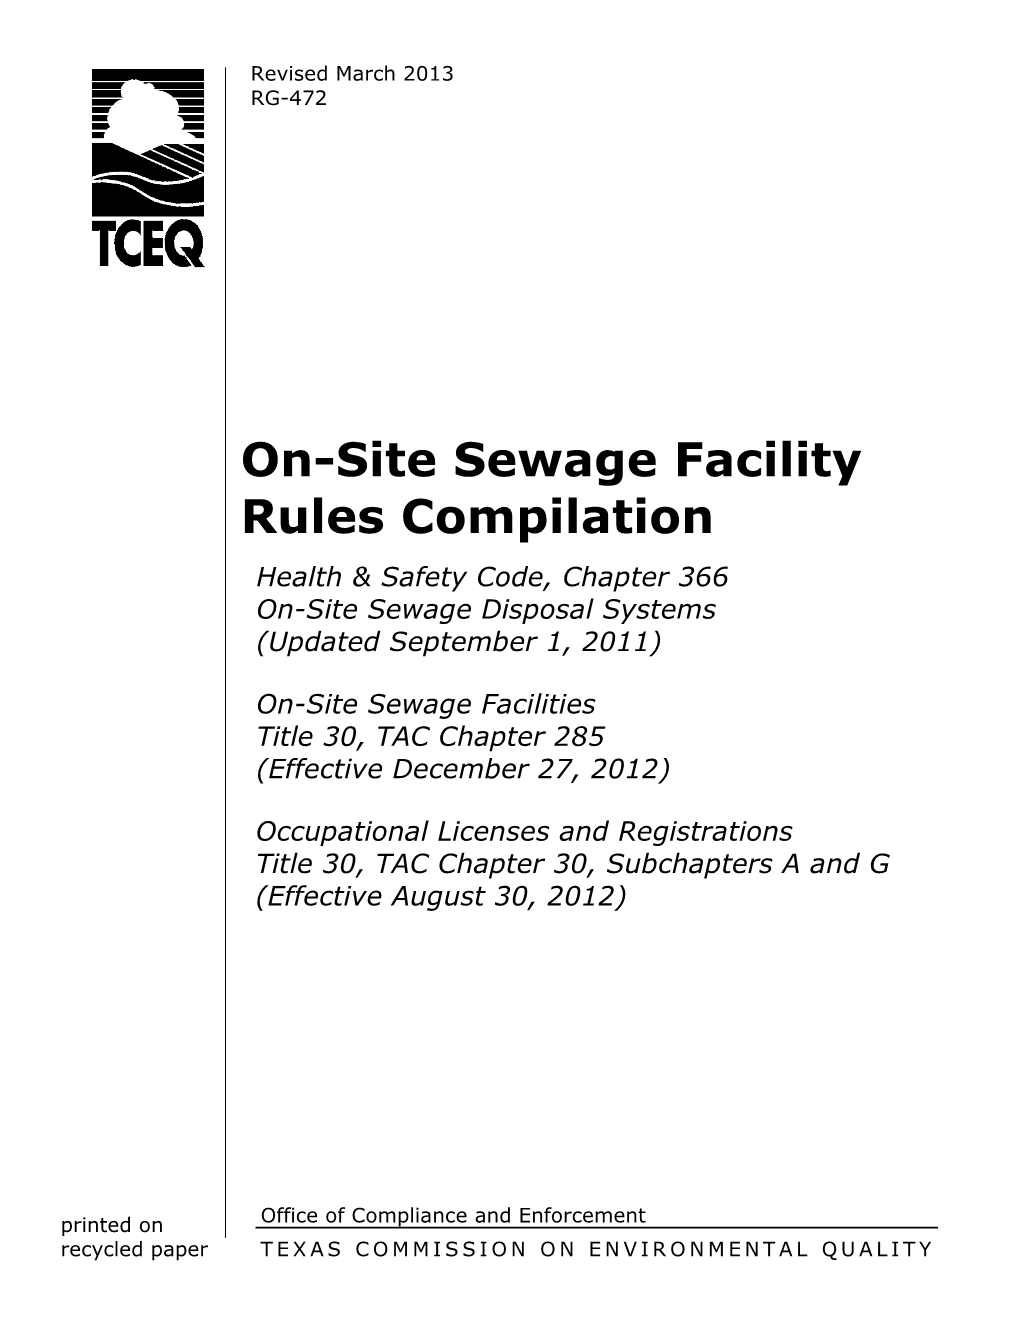 On-Site Sewage Facilities Title 30, TAC Chapter 285 (Effective December 27, 2012)